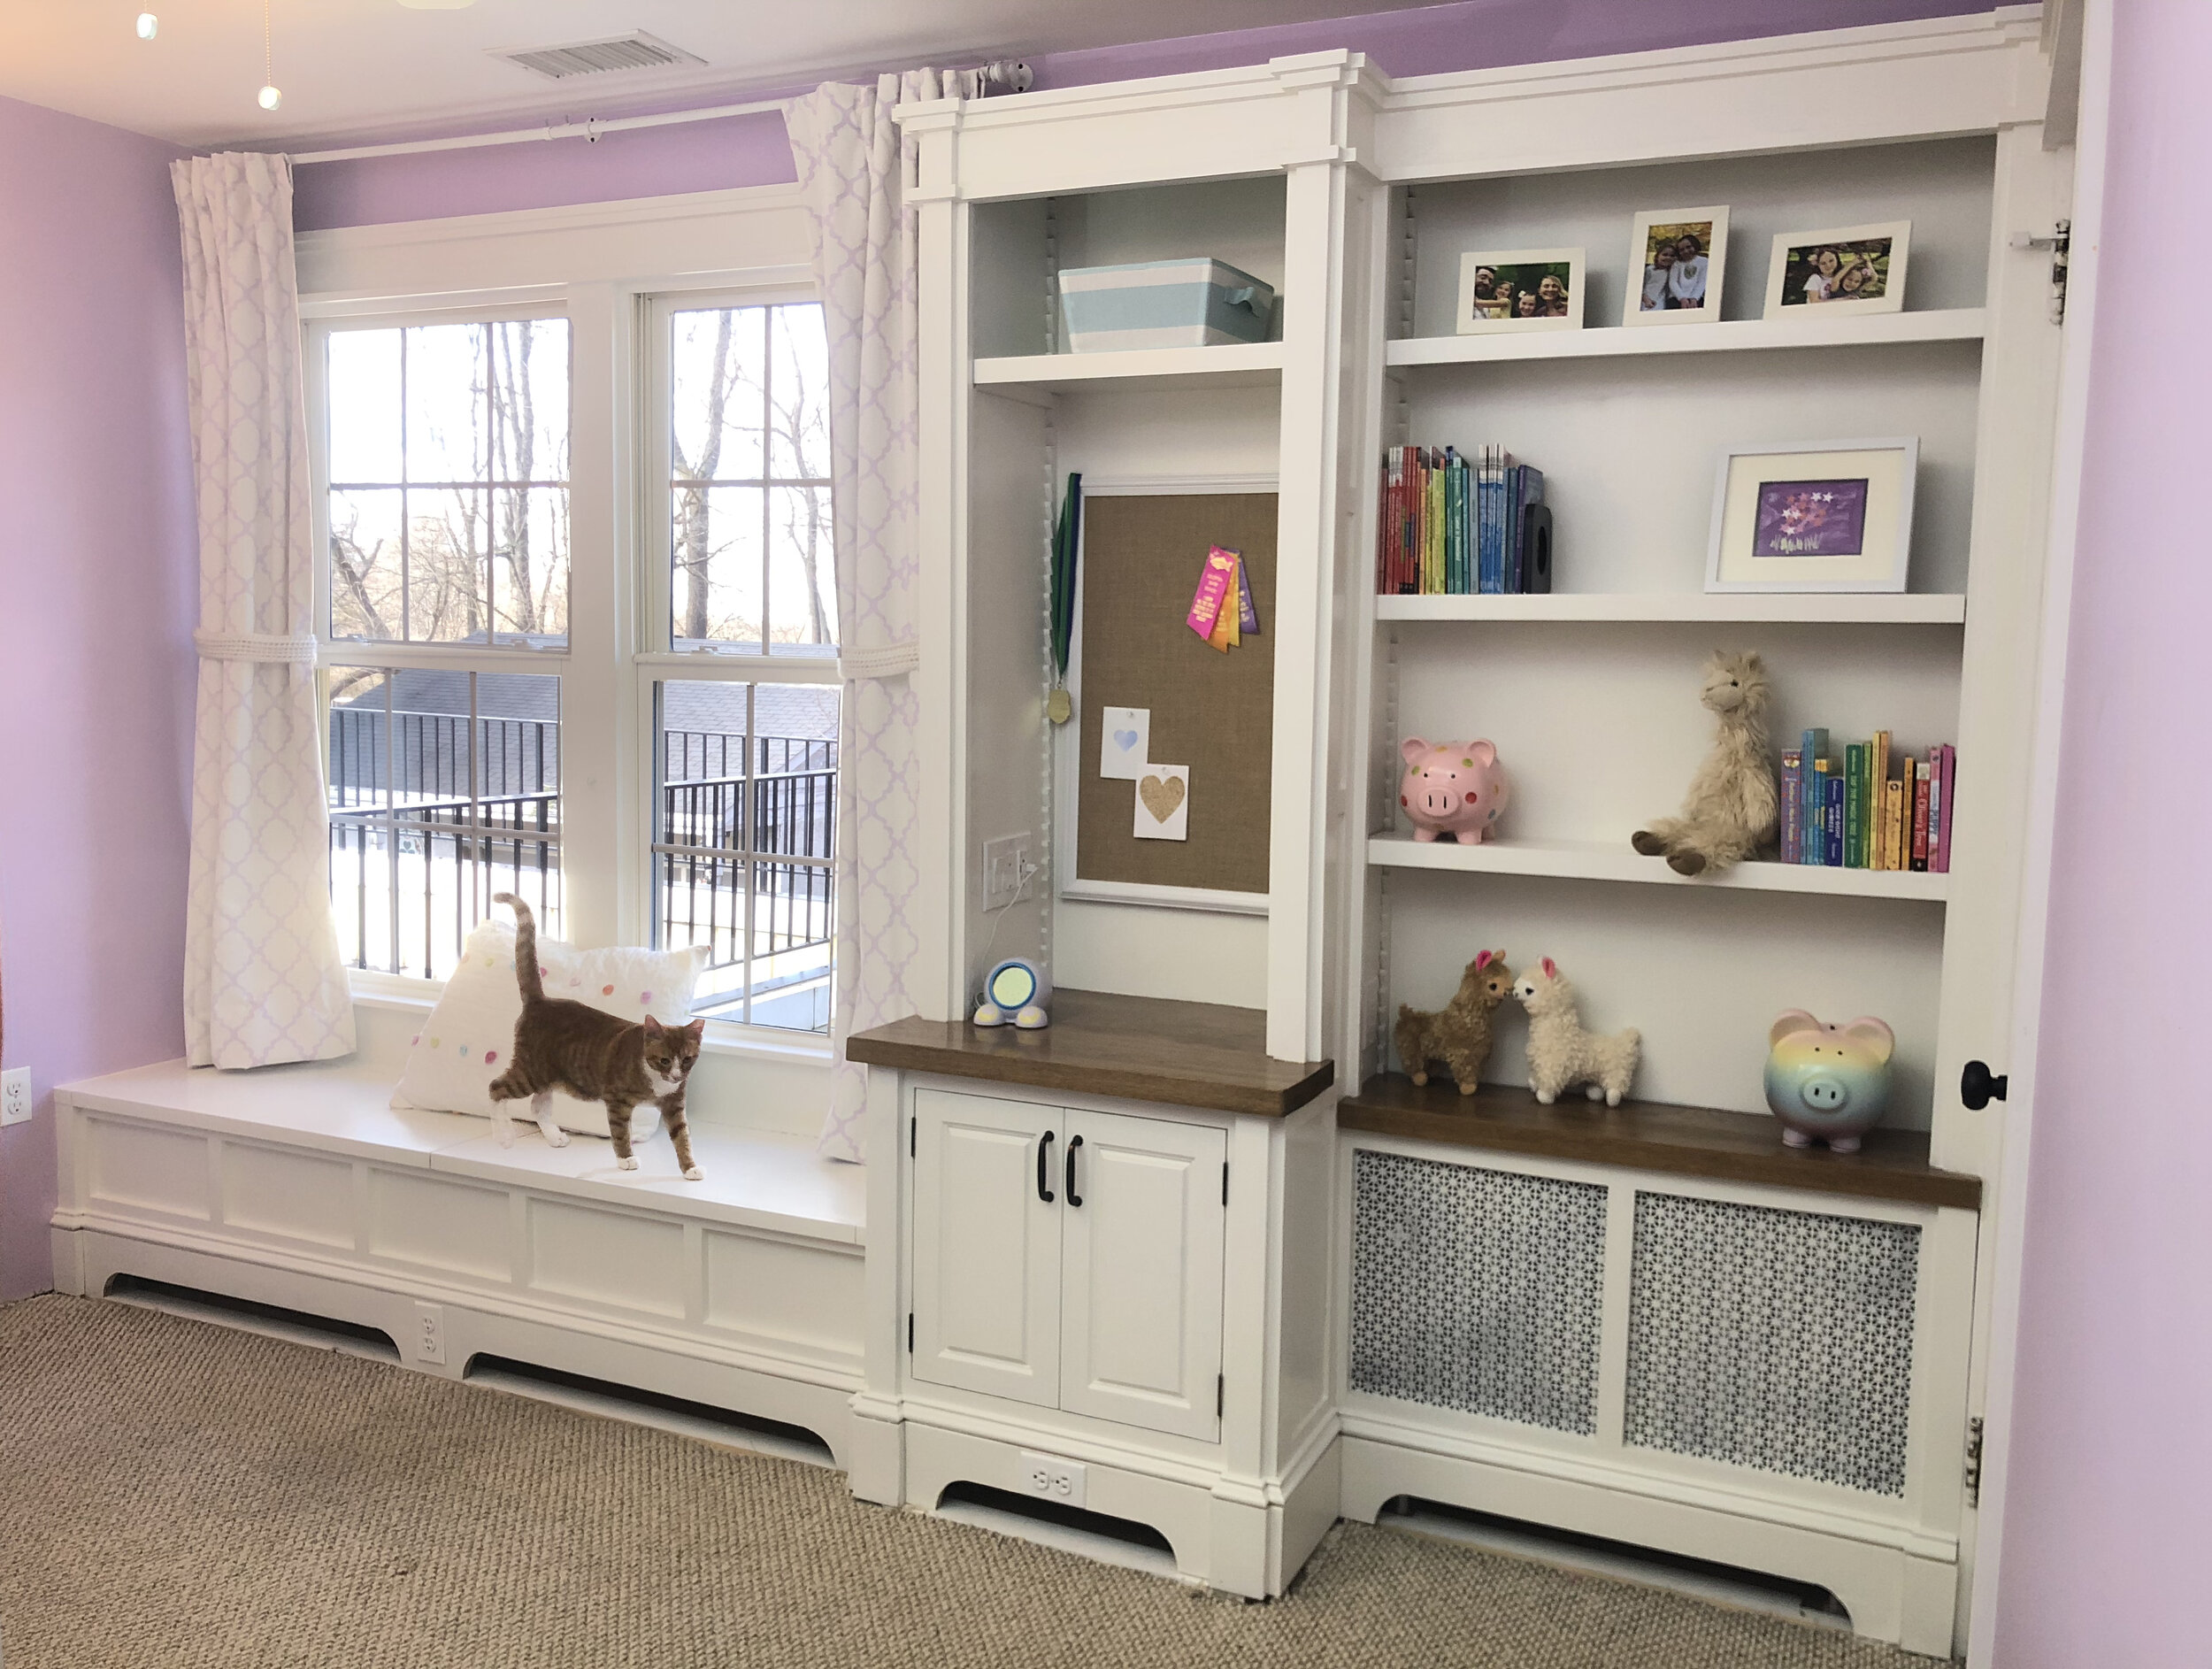  My daughters share a room and needed some extra storage, shelving, etc, and we wanted to incorporate a window seat as well. Since it was for my own house, I didn’t take pictures except for these finished ones. The radiator cover on the lower right i